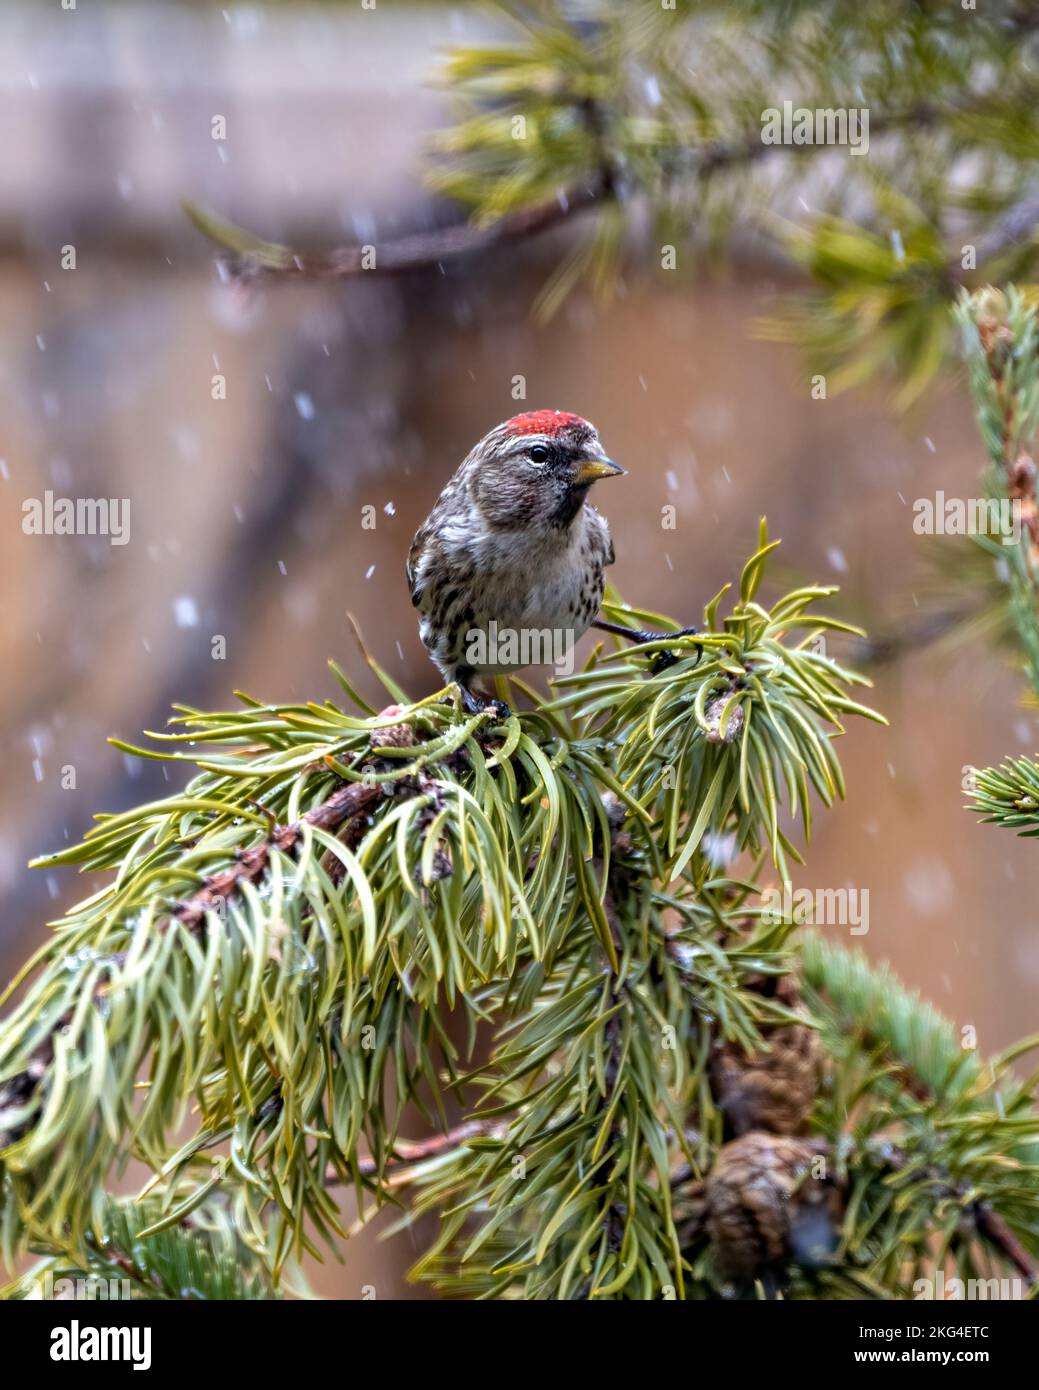 Red poll close-up profile view with falling snow perched on a pine branch with a blur background in its environment and habitat. Finch Photo Stock Photo